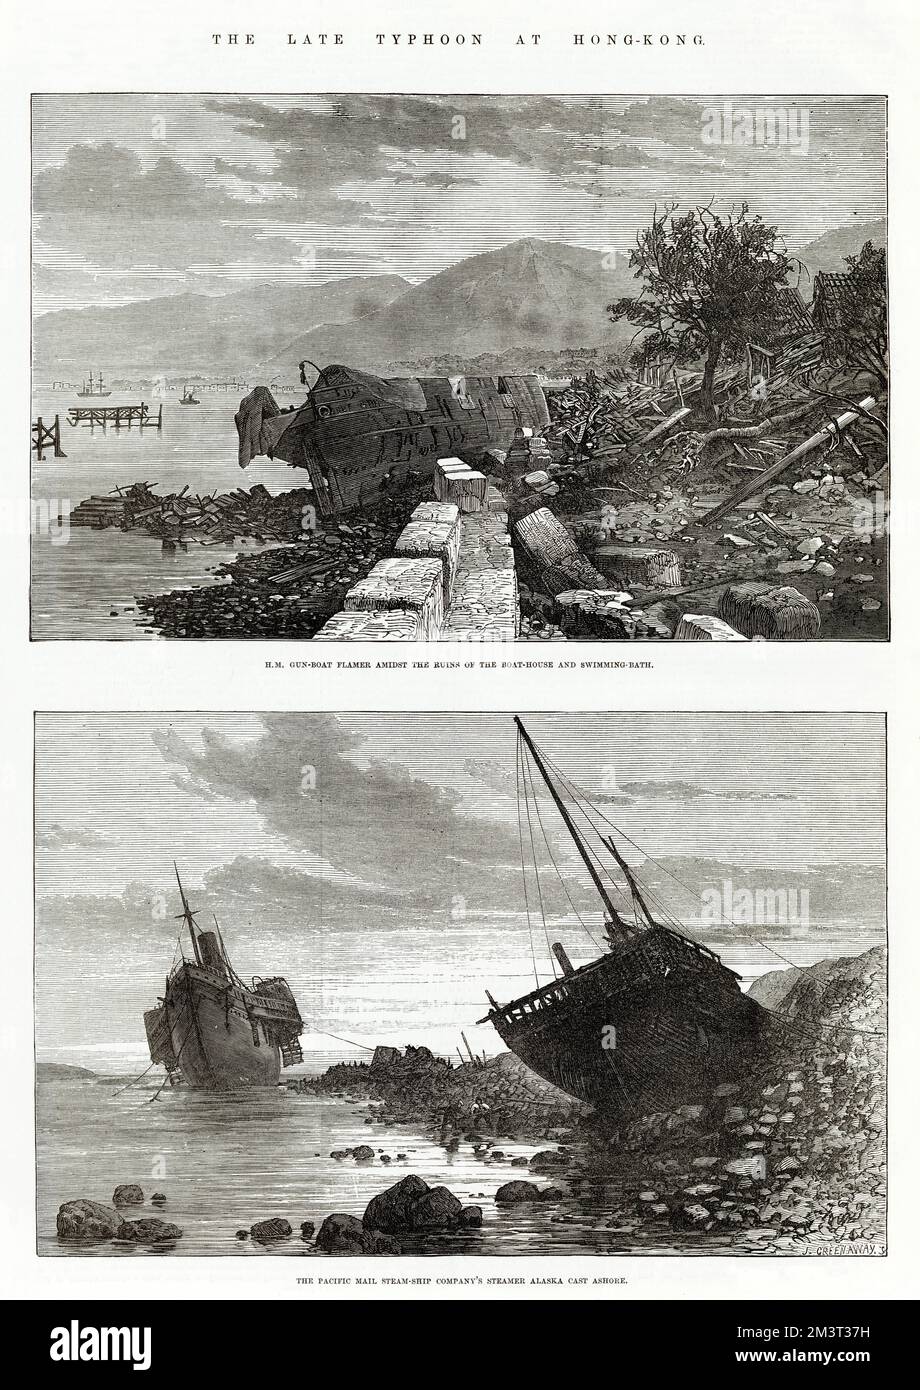 Page from the Illustrated London News depicting scenes in Hong Kong following a typhoon. Top picture shows H. M. gun-boat Flamer amidst the ruins of the boat-house and swimming-bath. Bottom picture shows the Pacific Mail steam-ship, Alaska cast ashore. Stock Photo